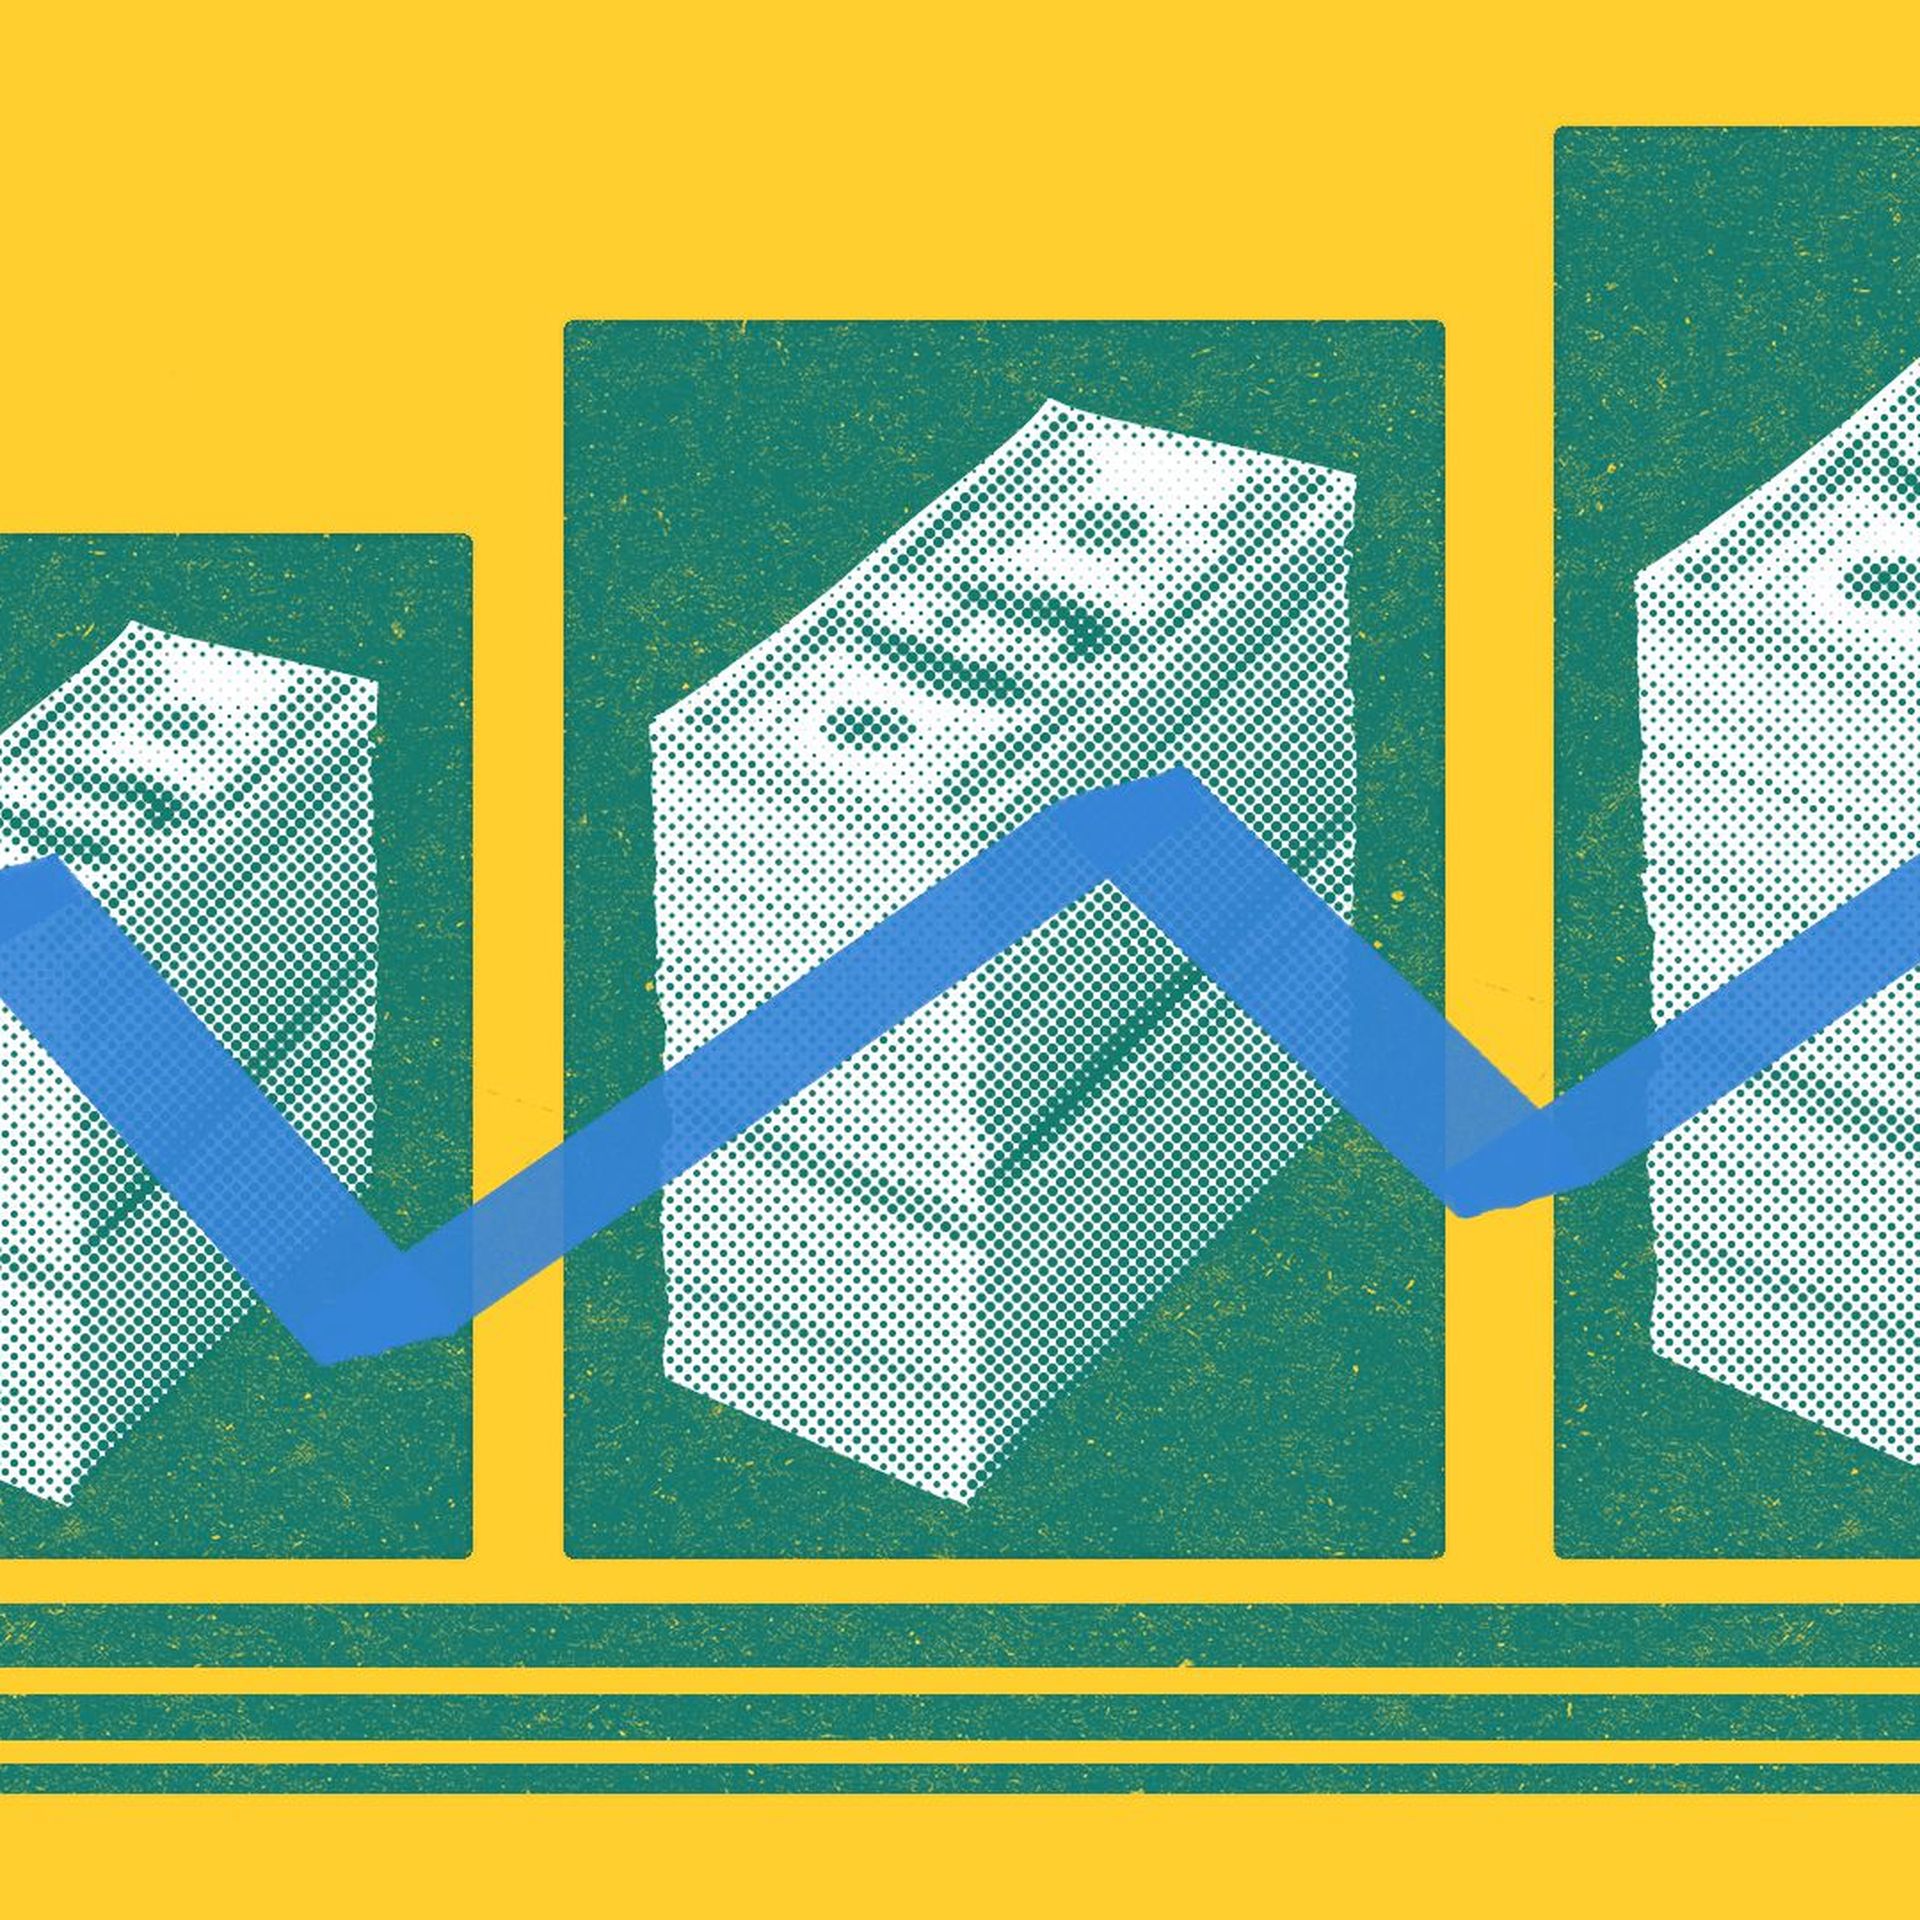 Illustration of a stack of cash repeated three times, over green shapes and a blue zigzag line.